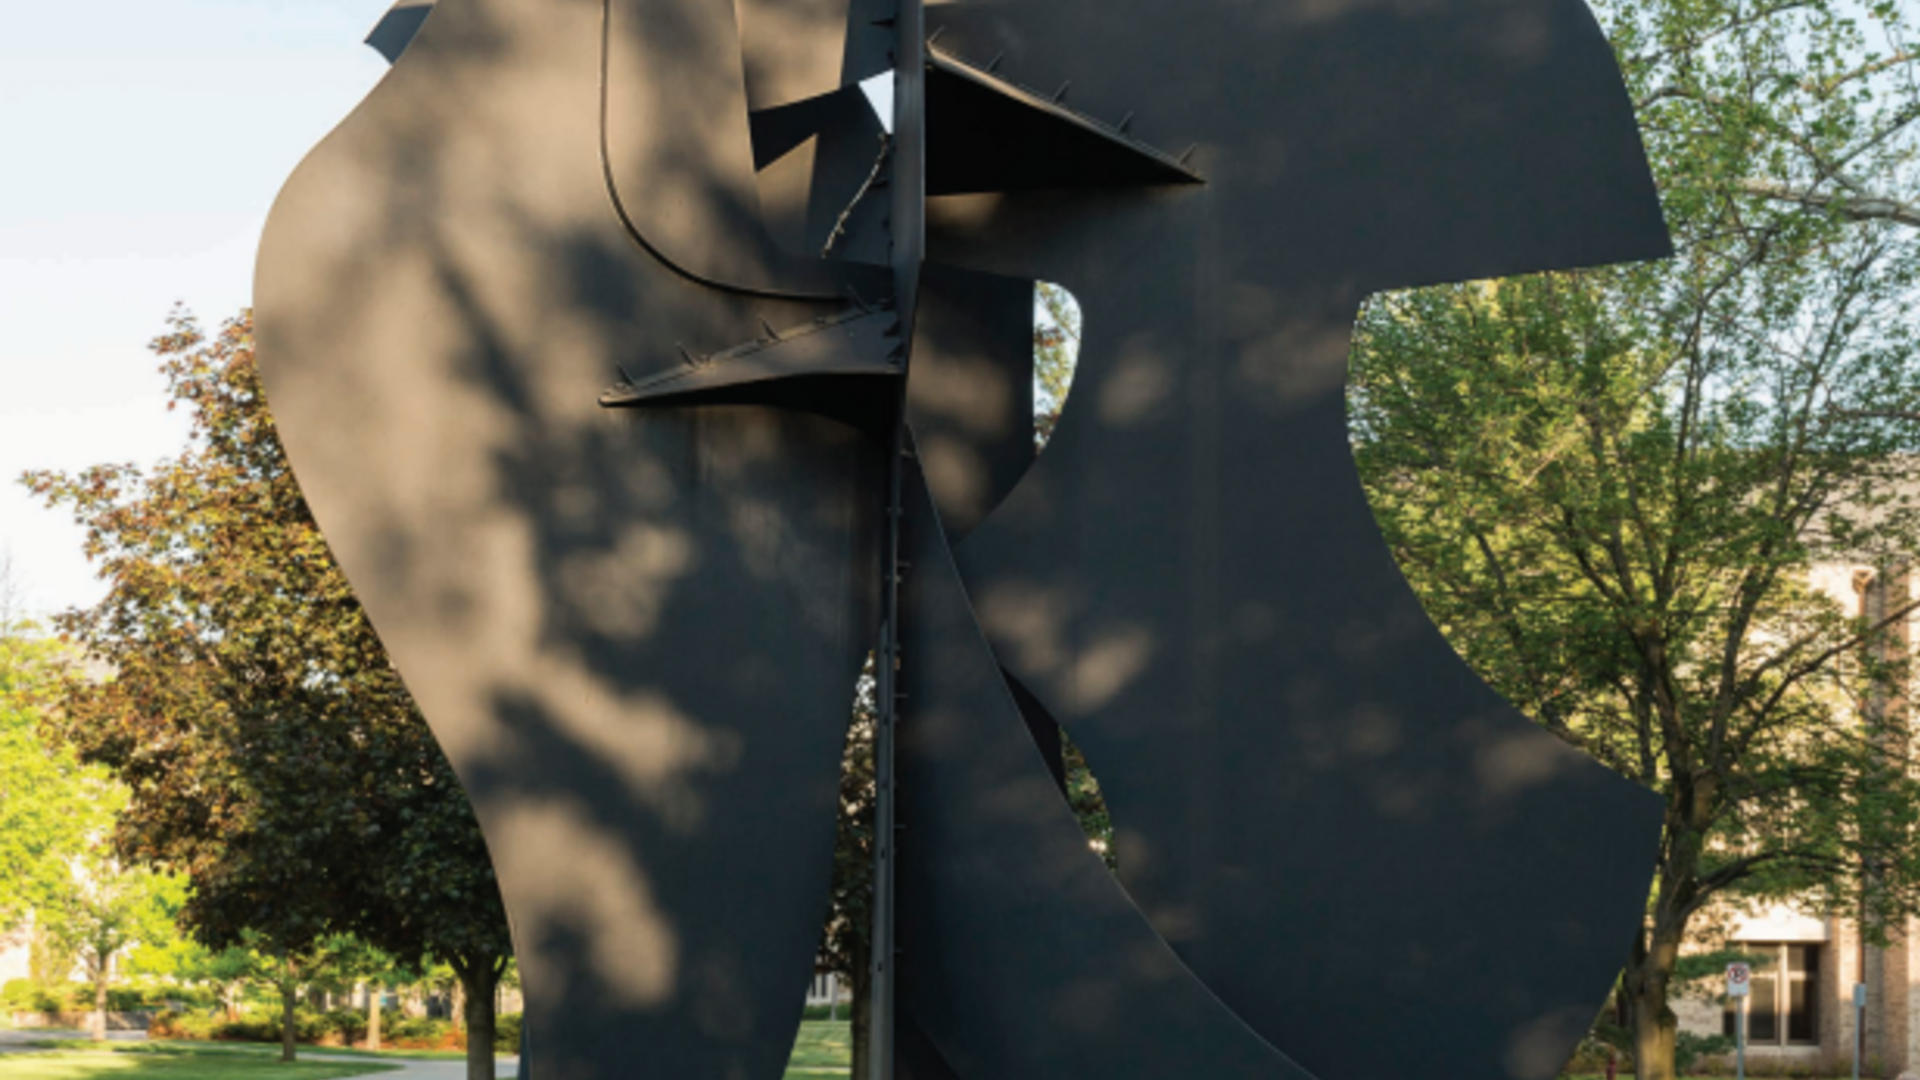 David Hayes' Griffon, 1989, is featured on the exhibition brochure cover. This 27-foot tall painted steel work was purchased with funds provided by the Humana Endowment for American Art, 1989.026